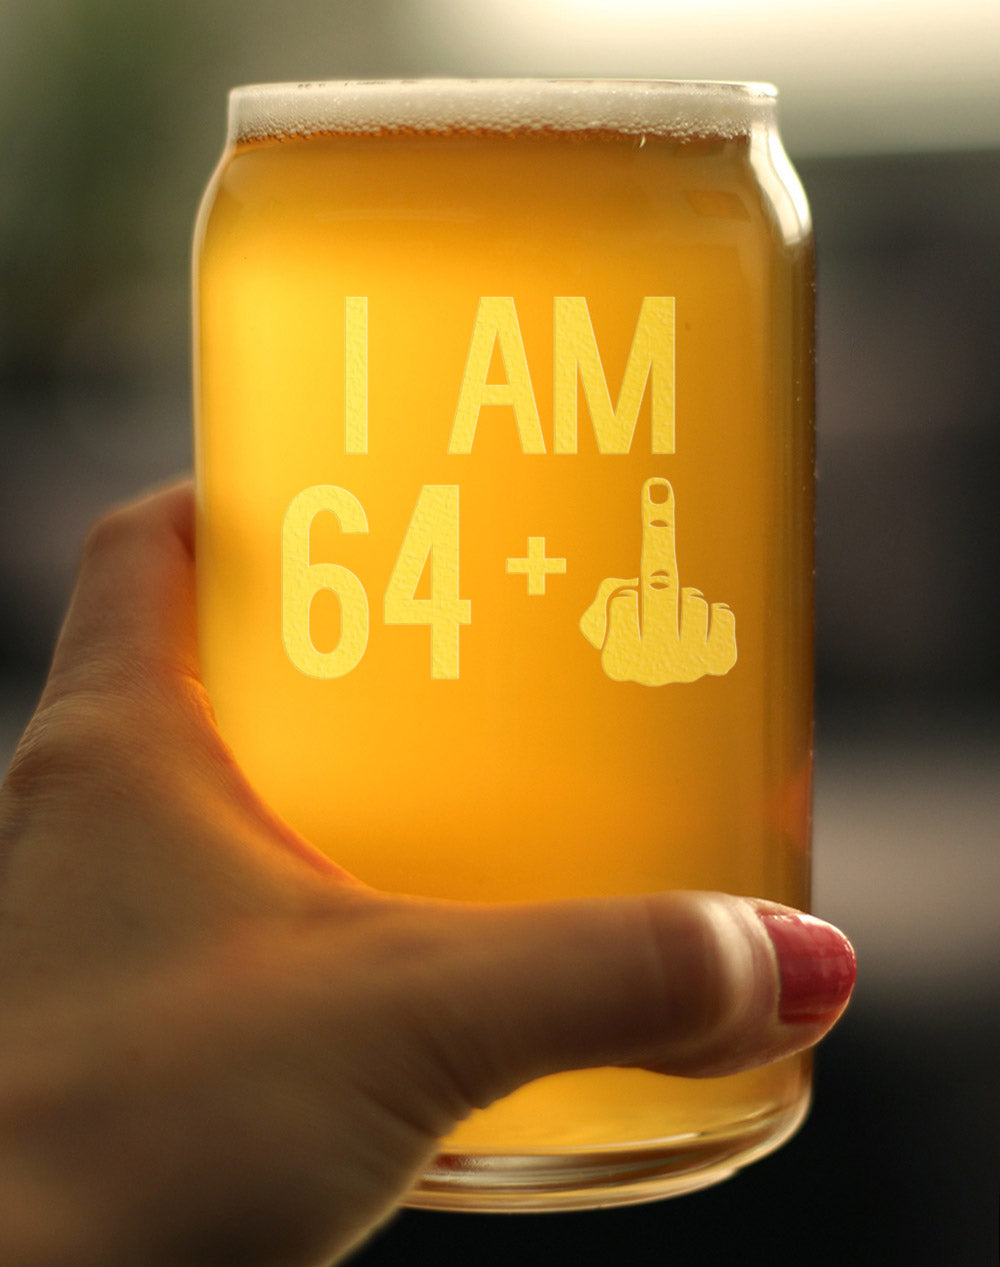 64 + 1 Middle Finger - 16 Ounce Beer Can Pint Glass